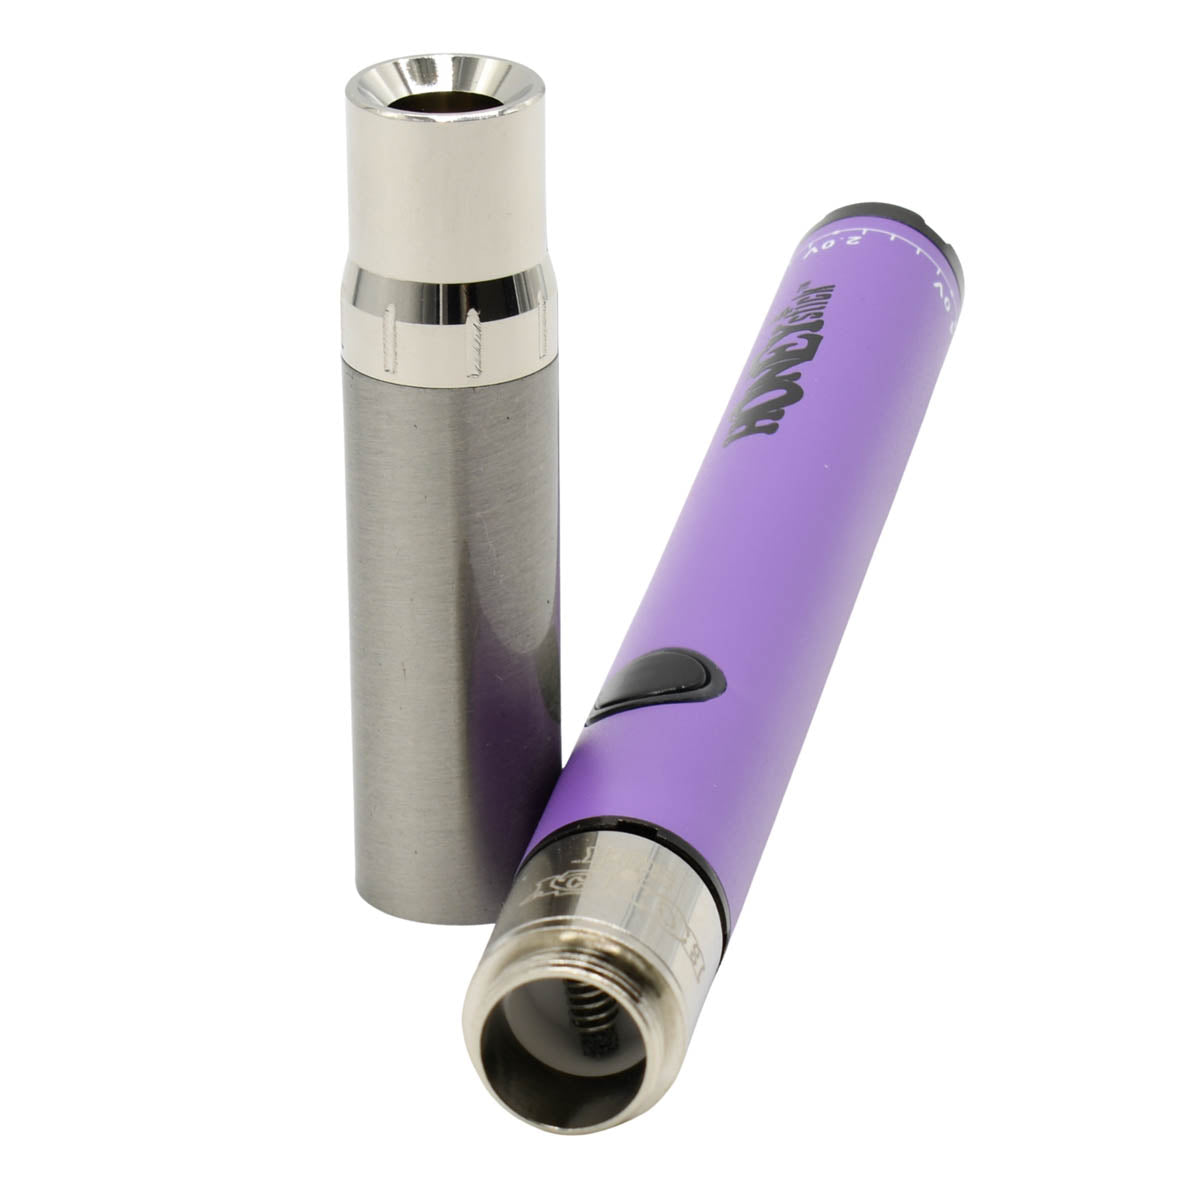 Dab pens that look like nicotine vapes? : r/entwives